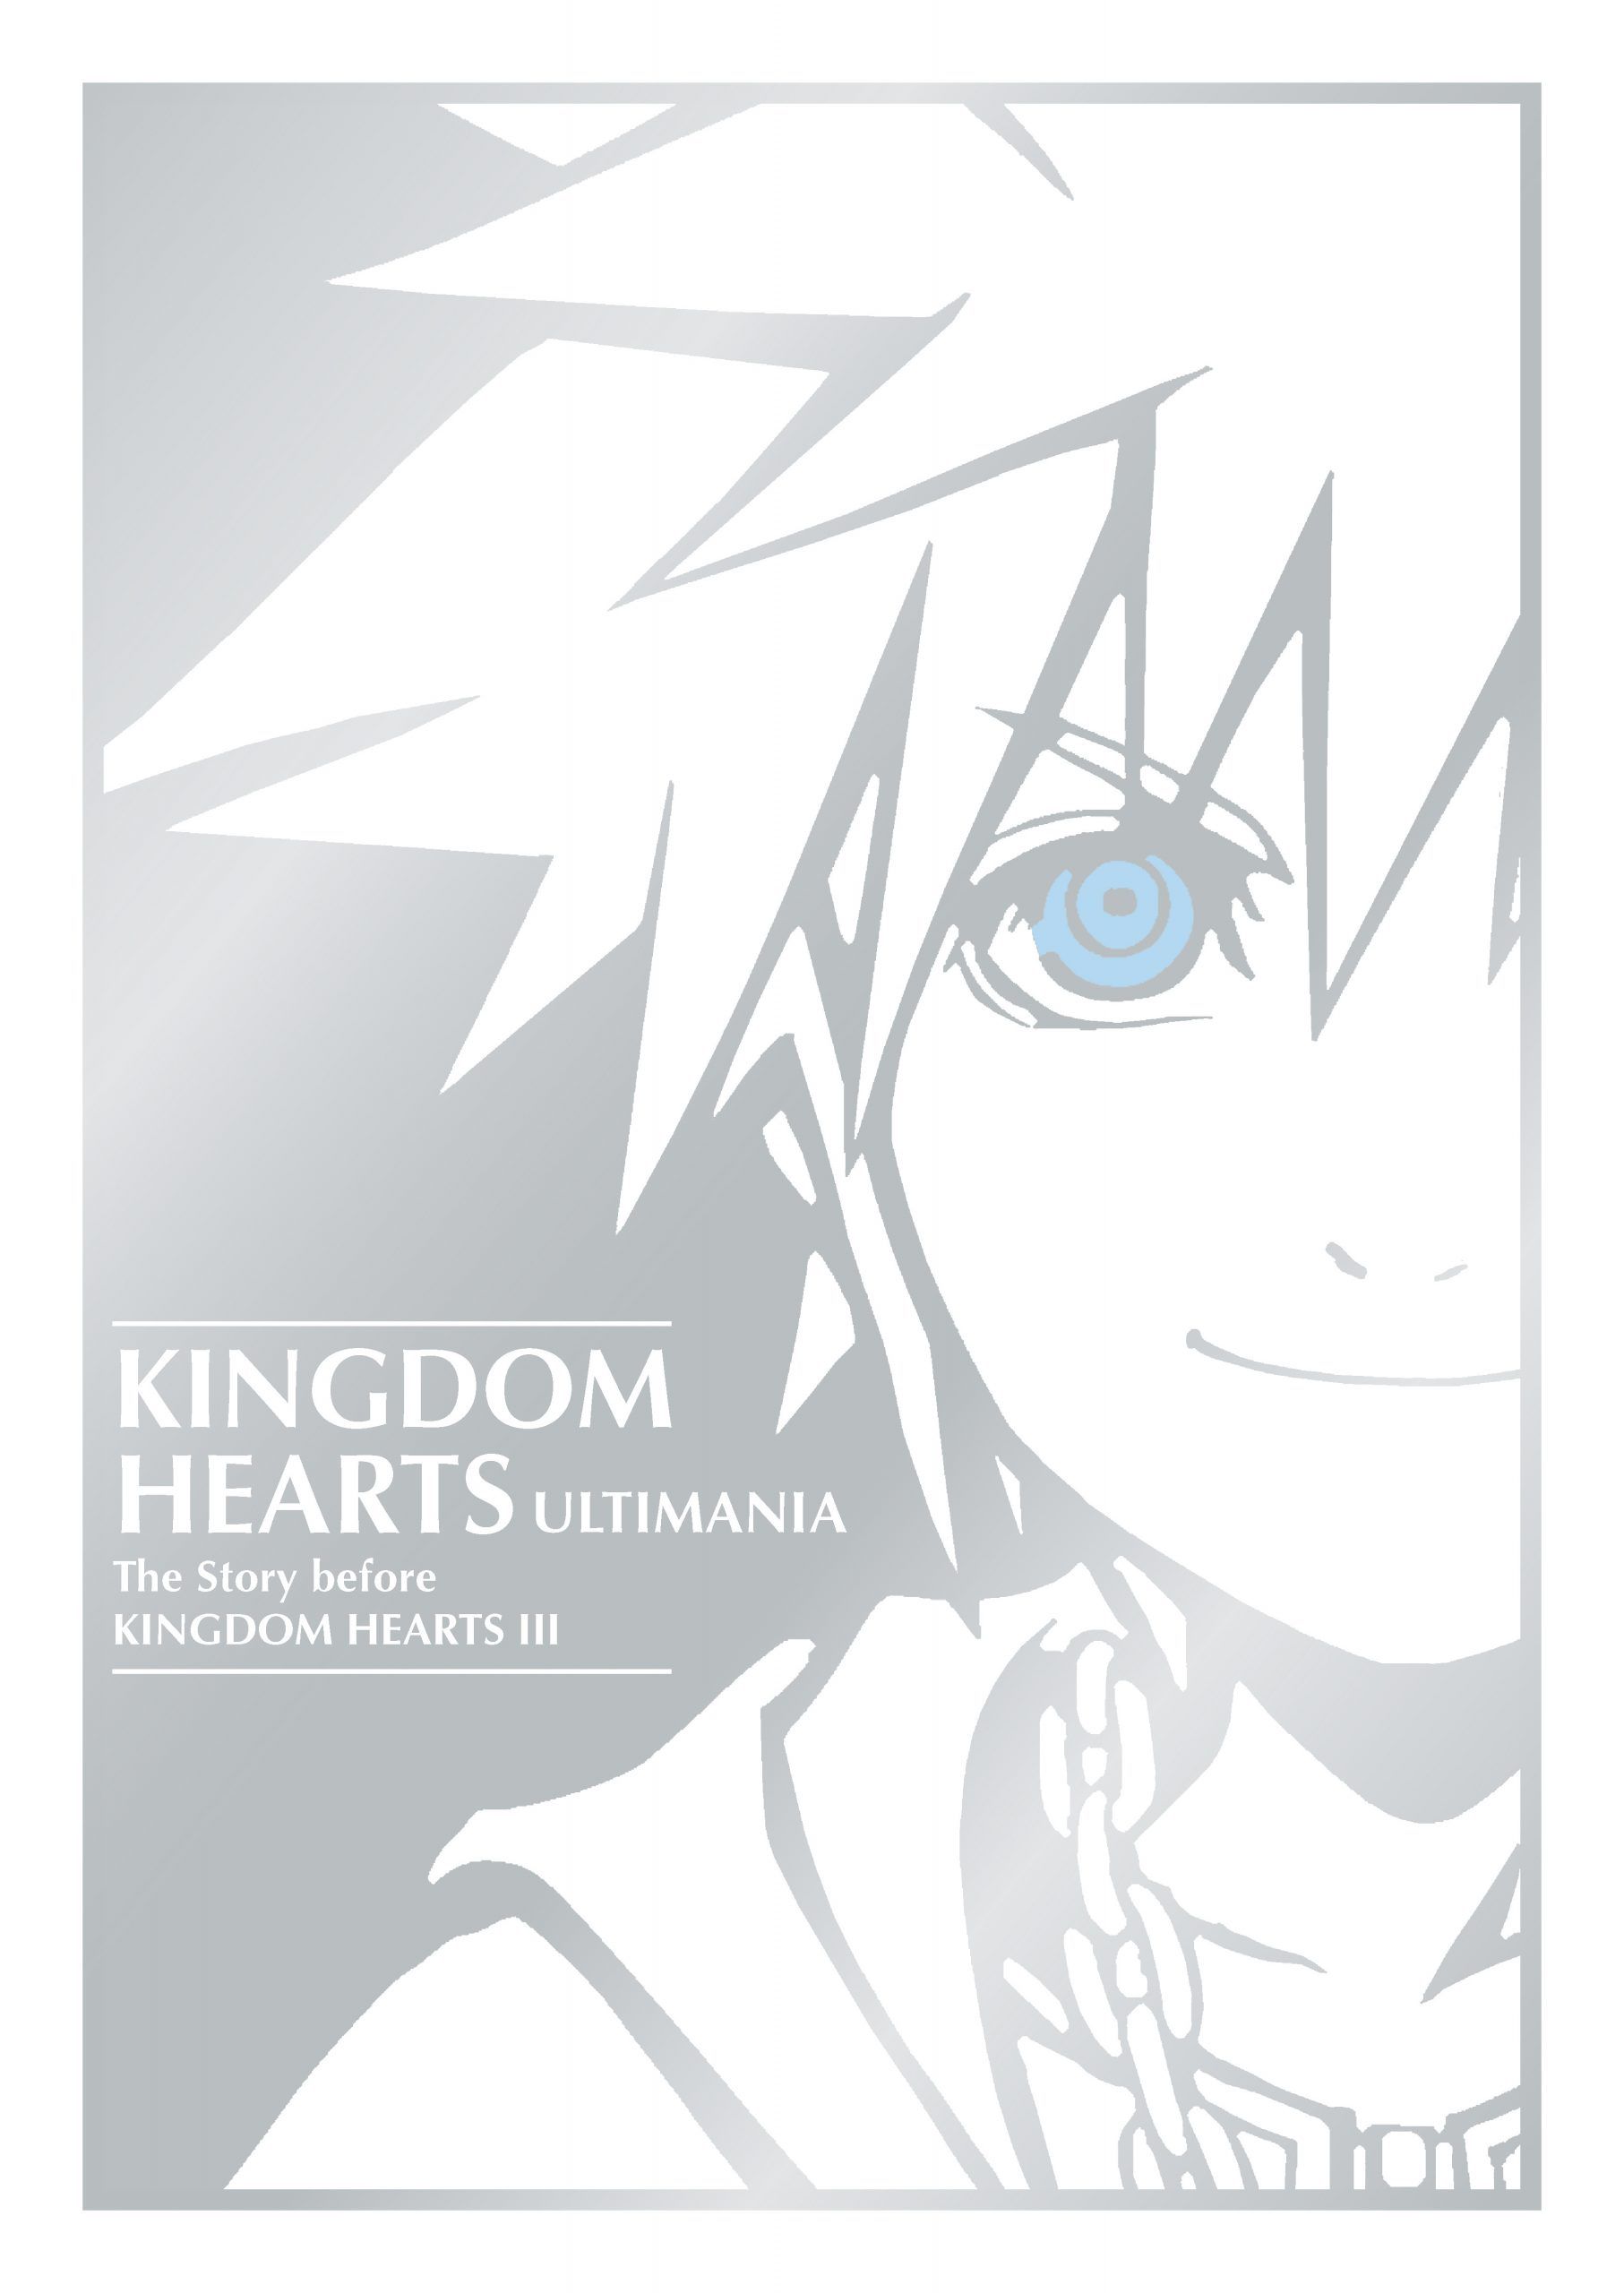 kh, Kingdom Hearts, Kingdom Hearts 3, Kingdom Hearts Melody of Memory, Melody of Memory, merch, Nintendo, Nintendo Switch, PS4, square, Square Enix, Switch, Xbox One